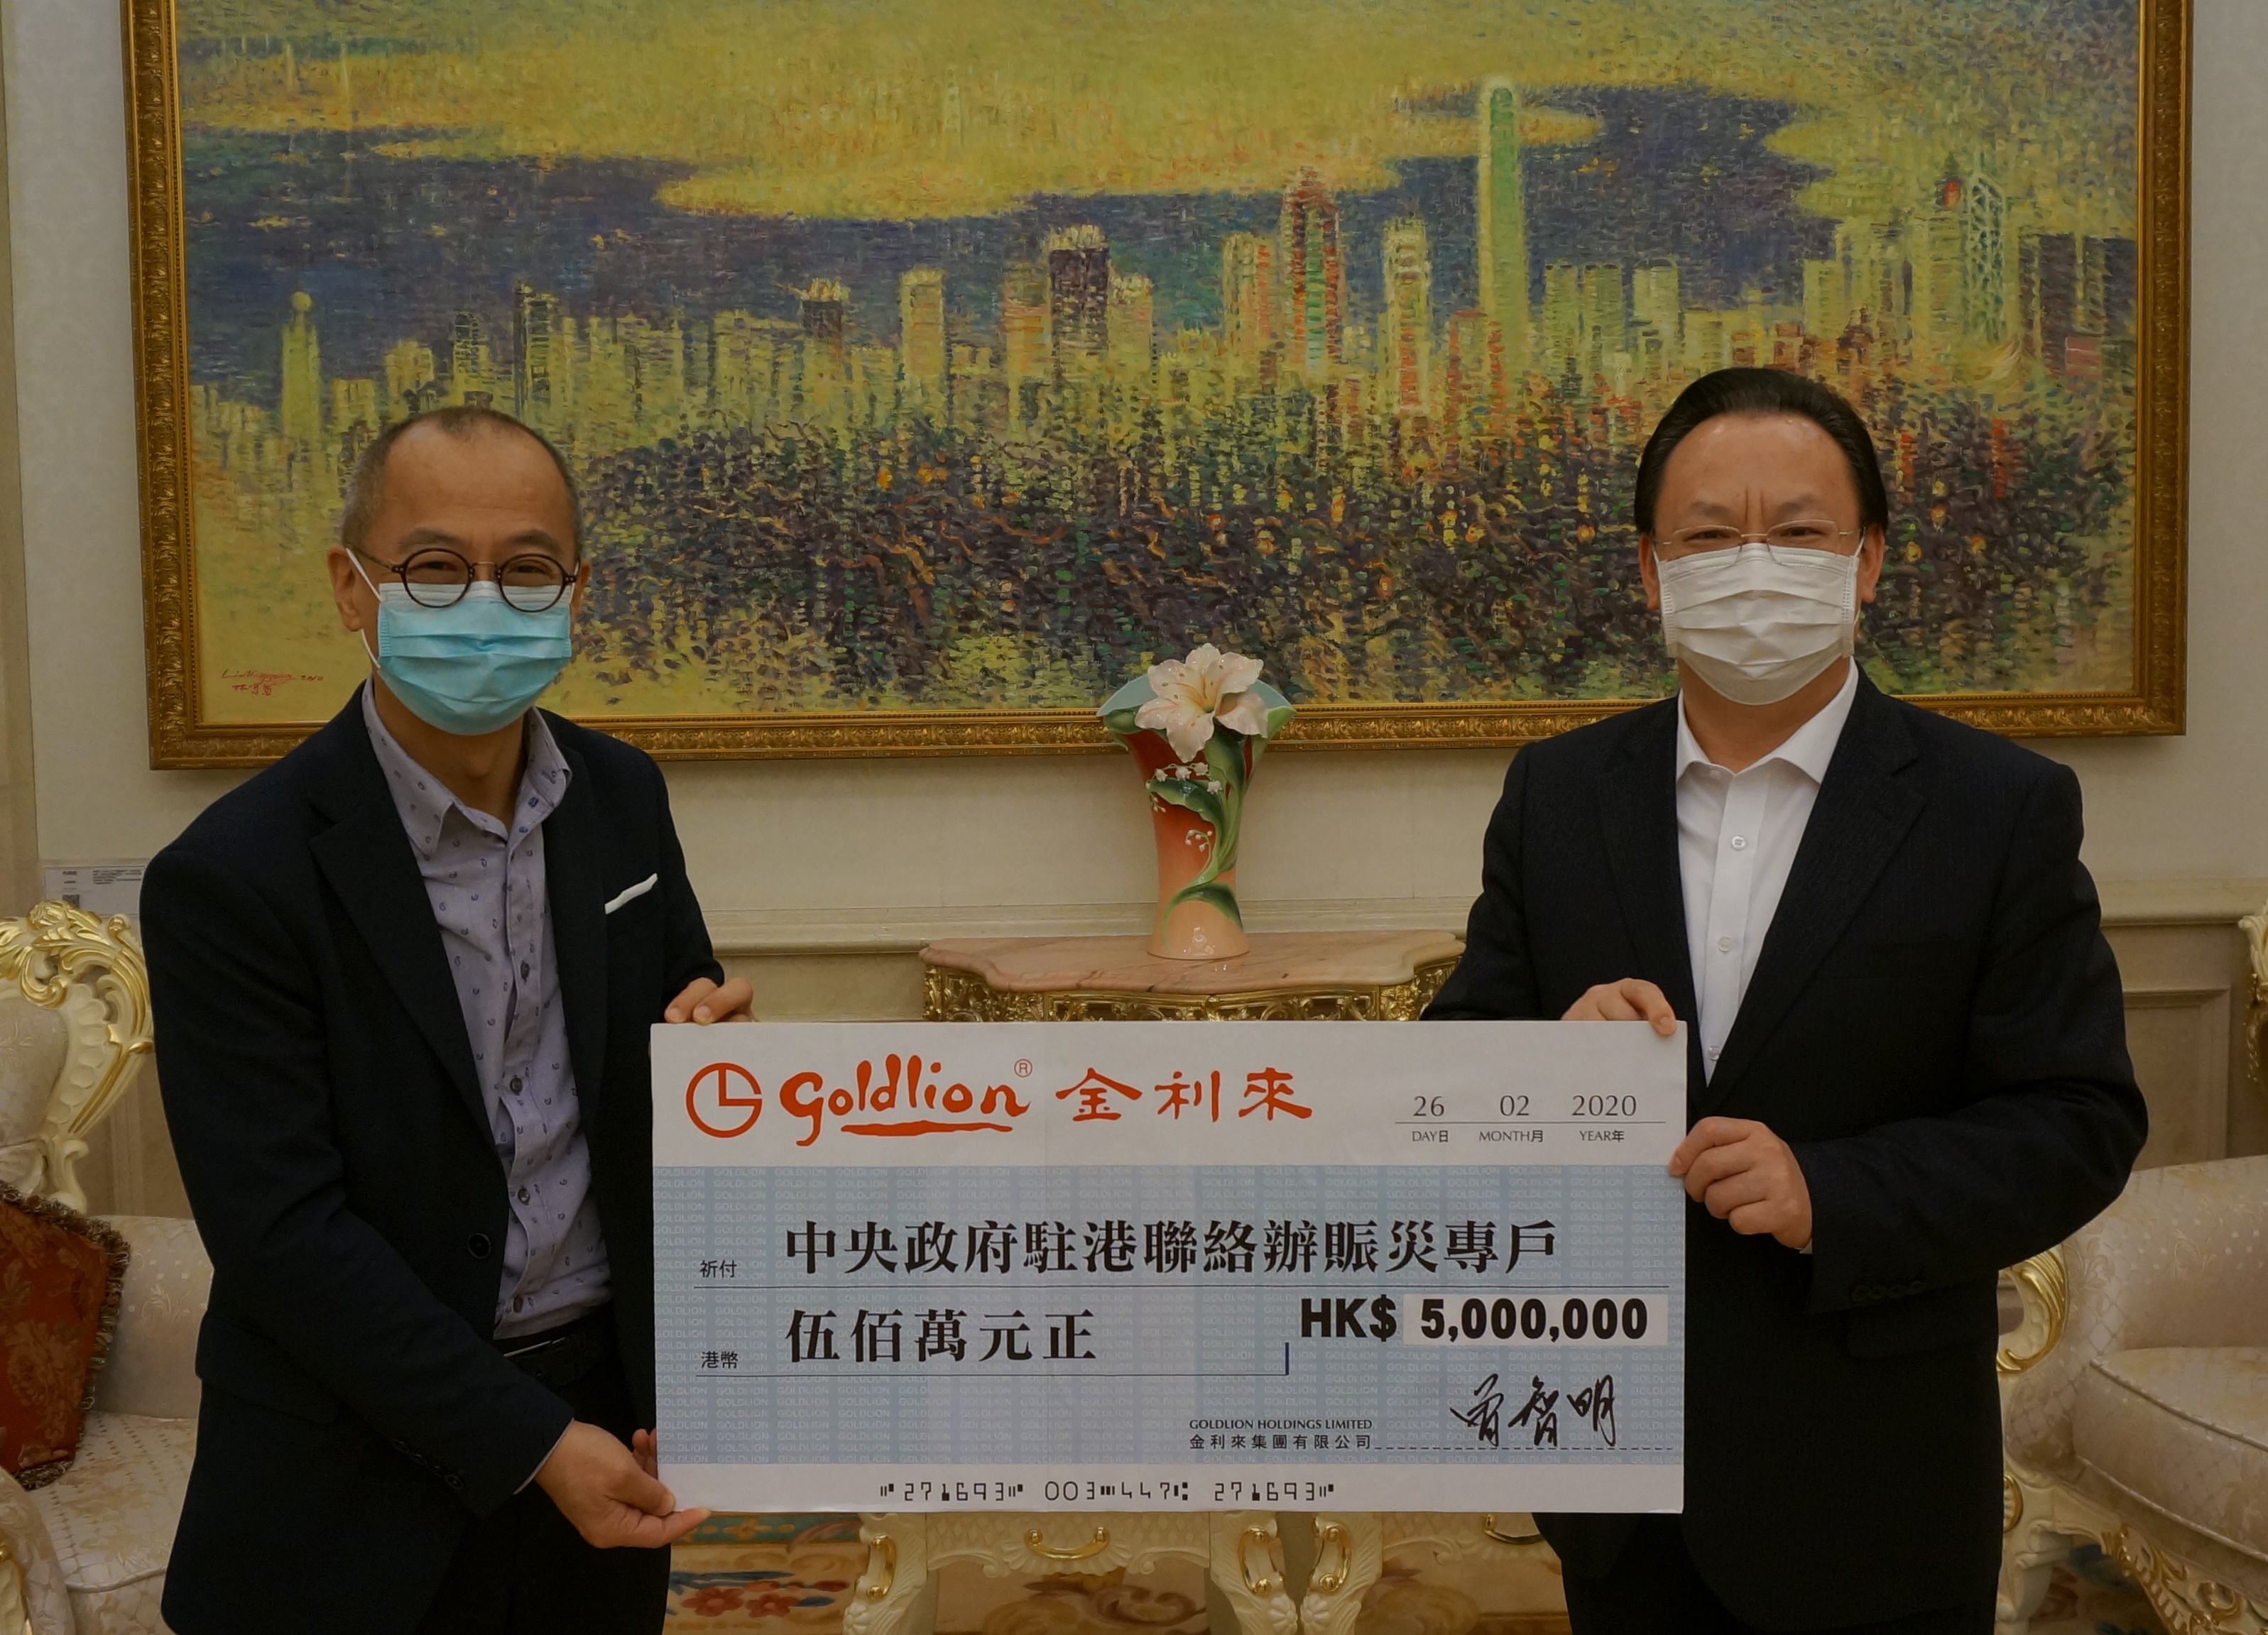 Mr. Jimmy Tsang (left), on behalf of Mr. Ricky Tsang, makes a donation of HK$5 million to provide COVID-19 relief in mainland China